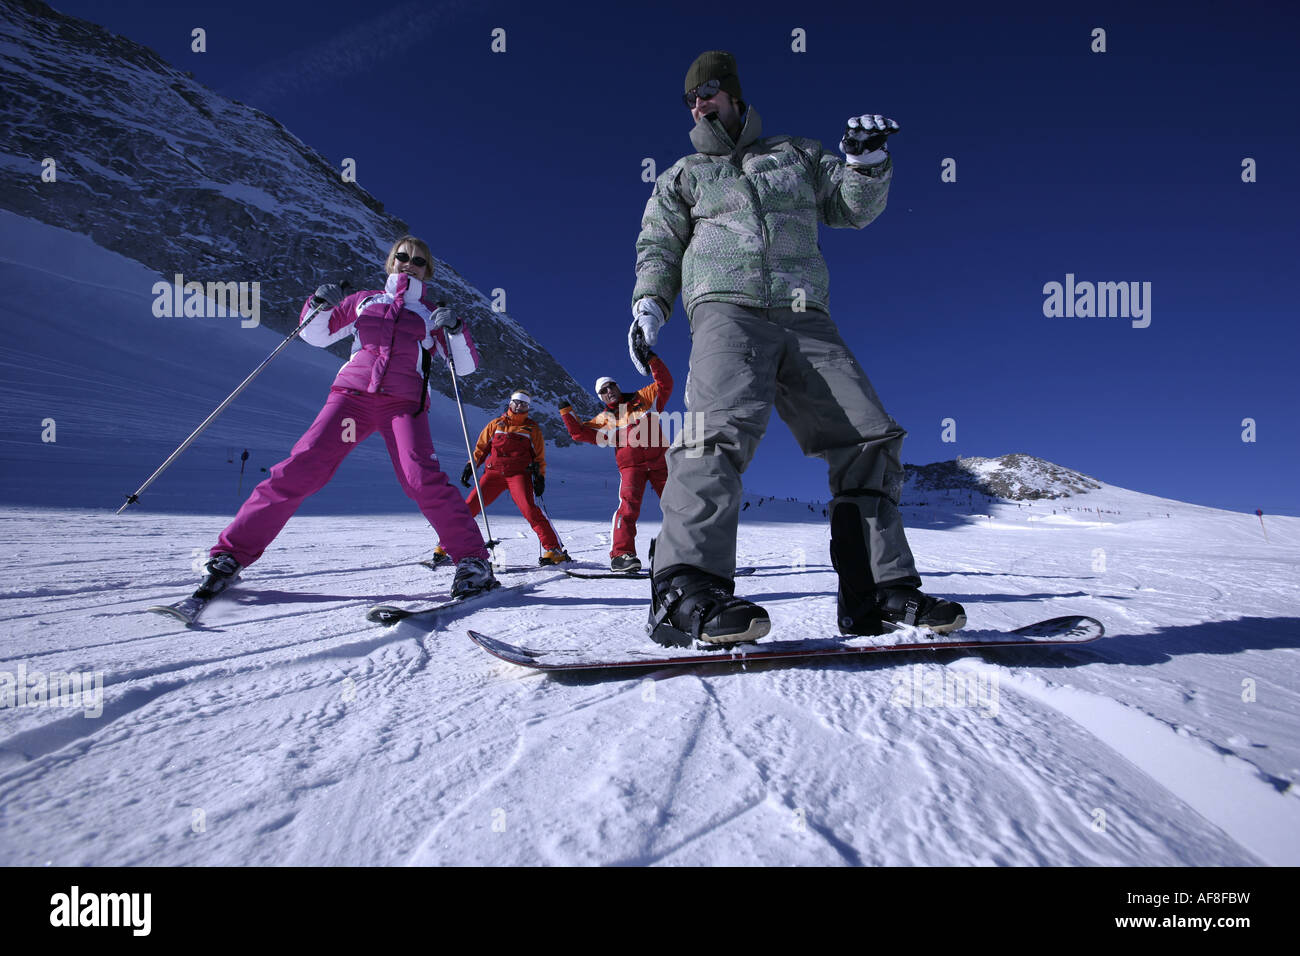 Two people having ski and snowboard lessons with ski instructors, Hintertux Glacier, Tyrol, Austria Stock Photo